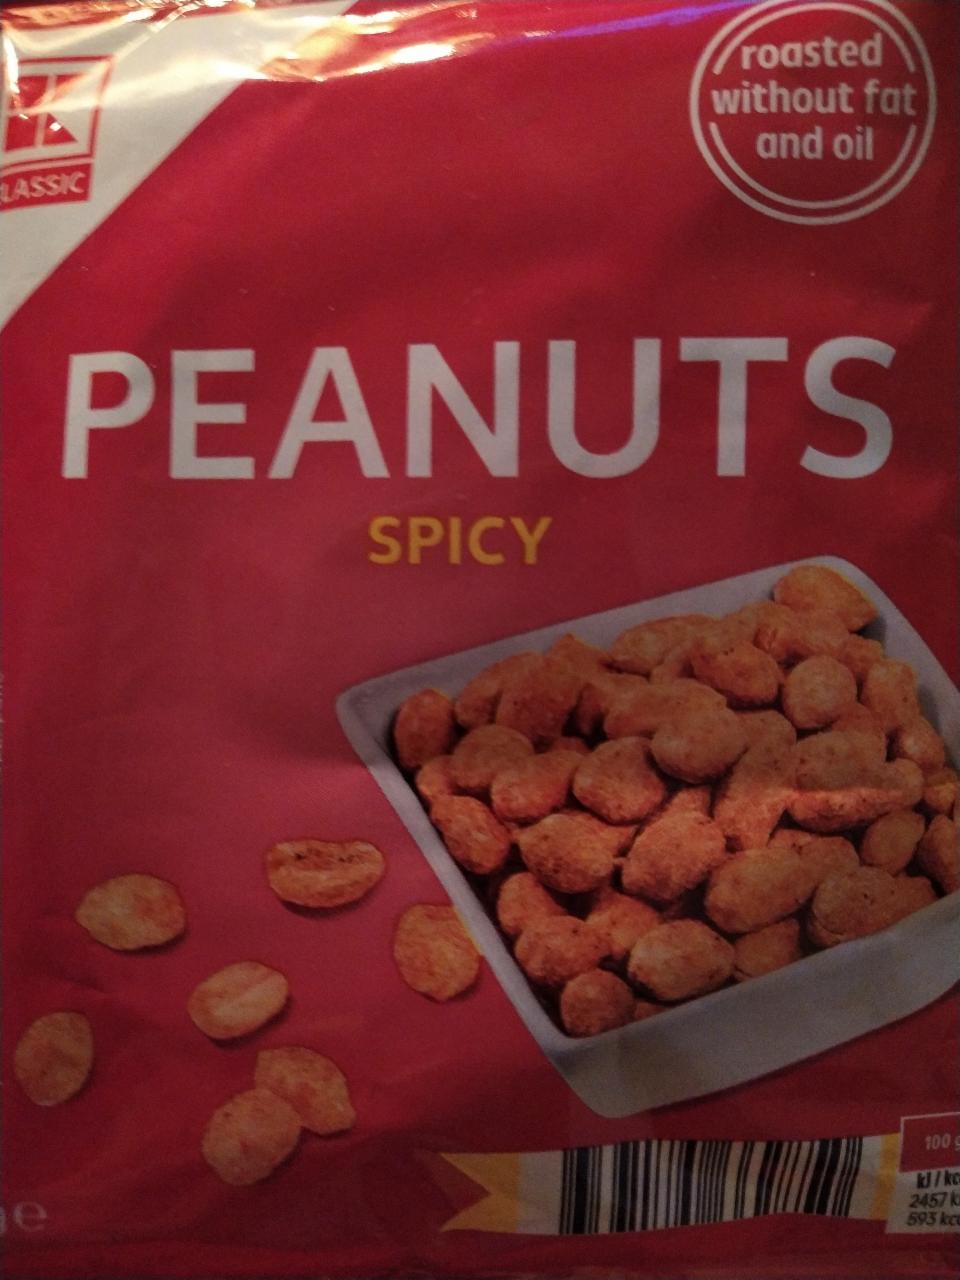 Fotografie - Peanuts Spicy Roasted without fat & oil